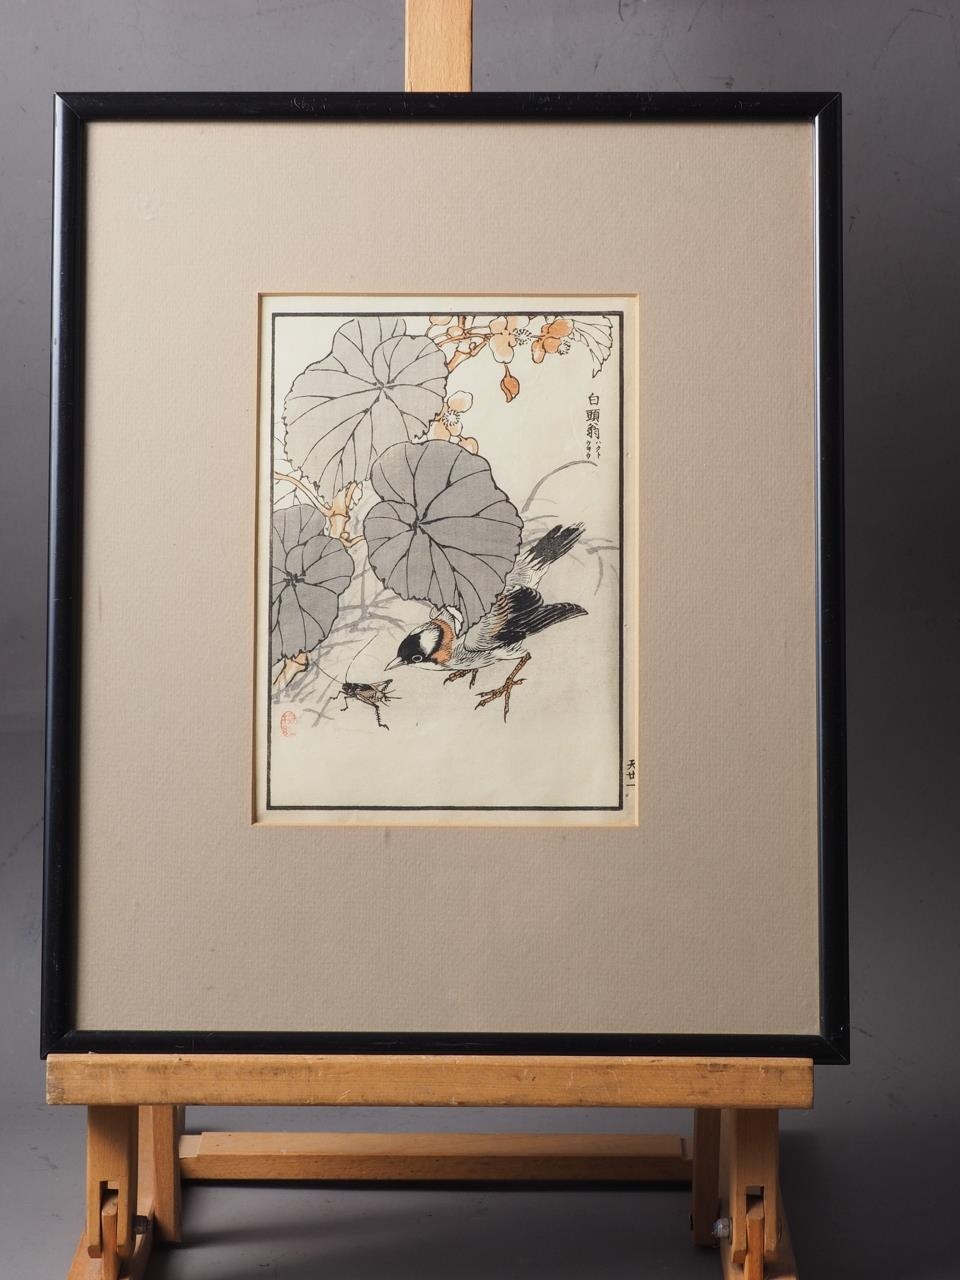 Joan Hussell: wood engraving, "Harvest Mice", in wood effect frame, and a Kono Bairei colour print - Image 4 of 5